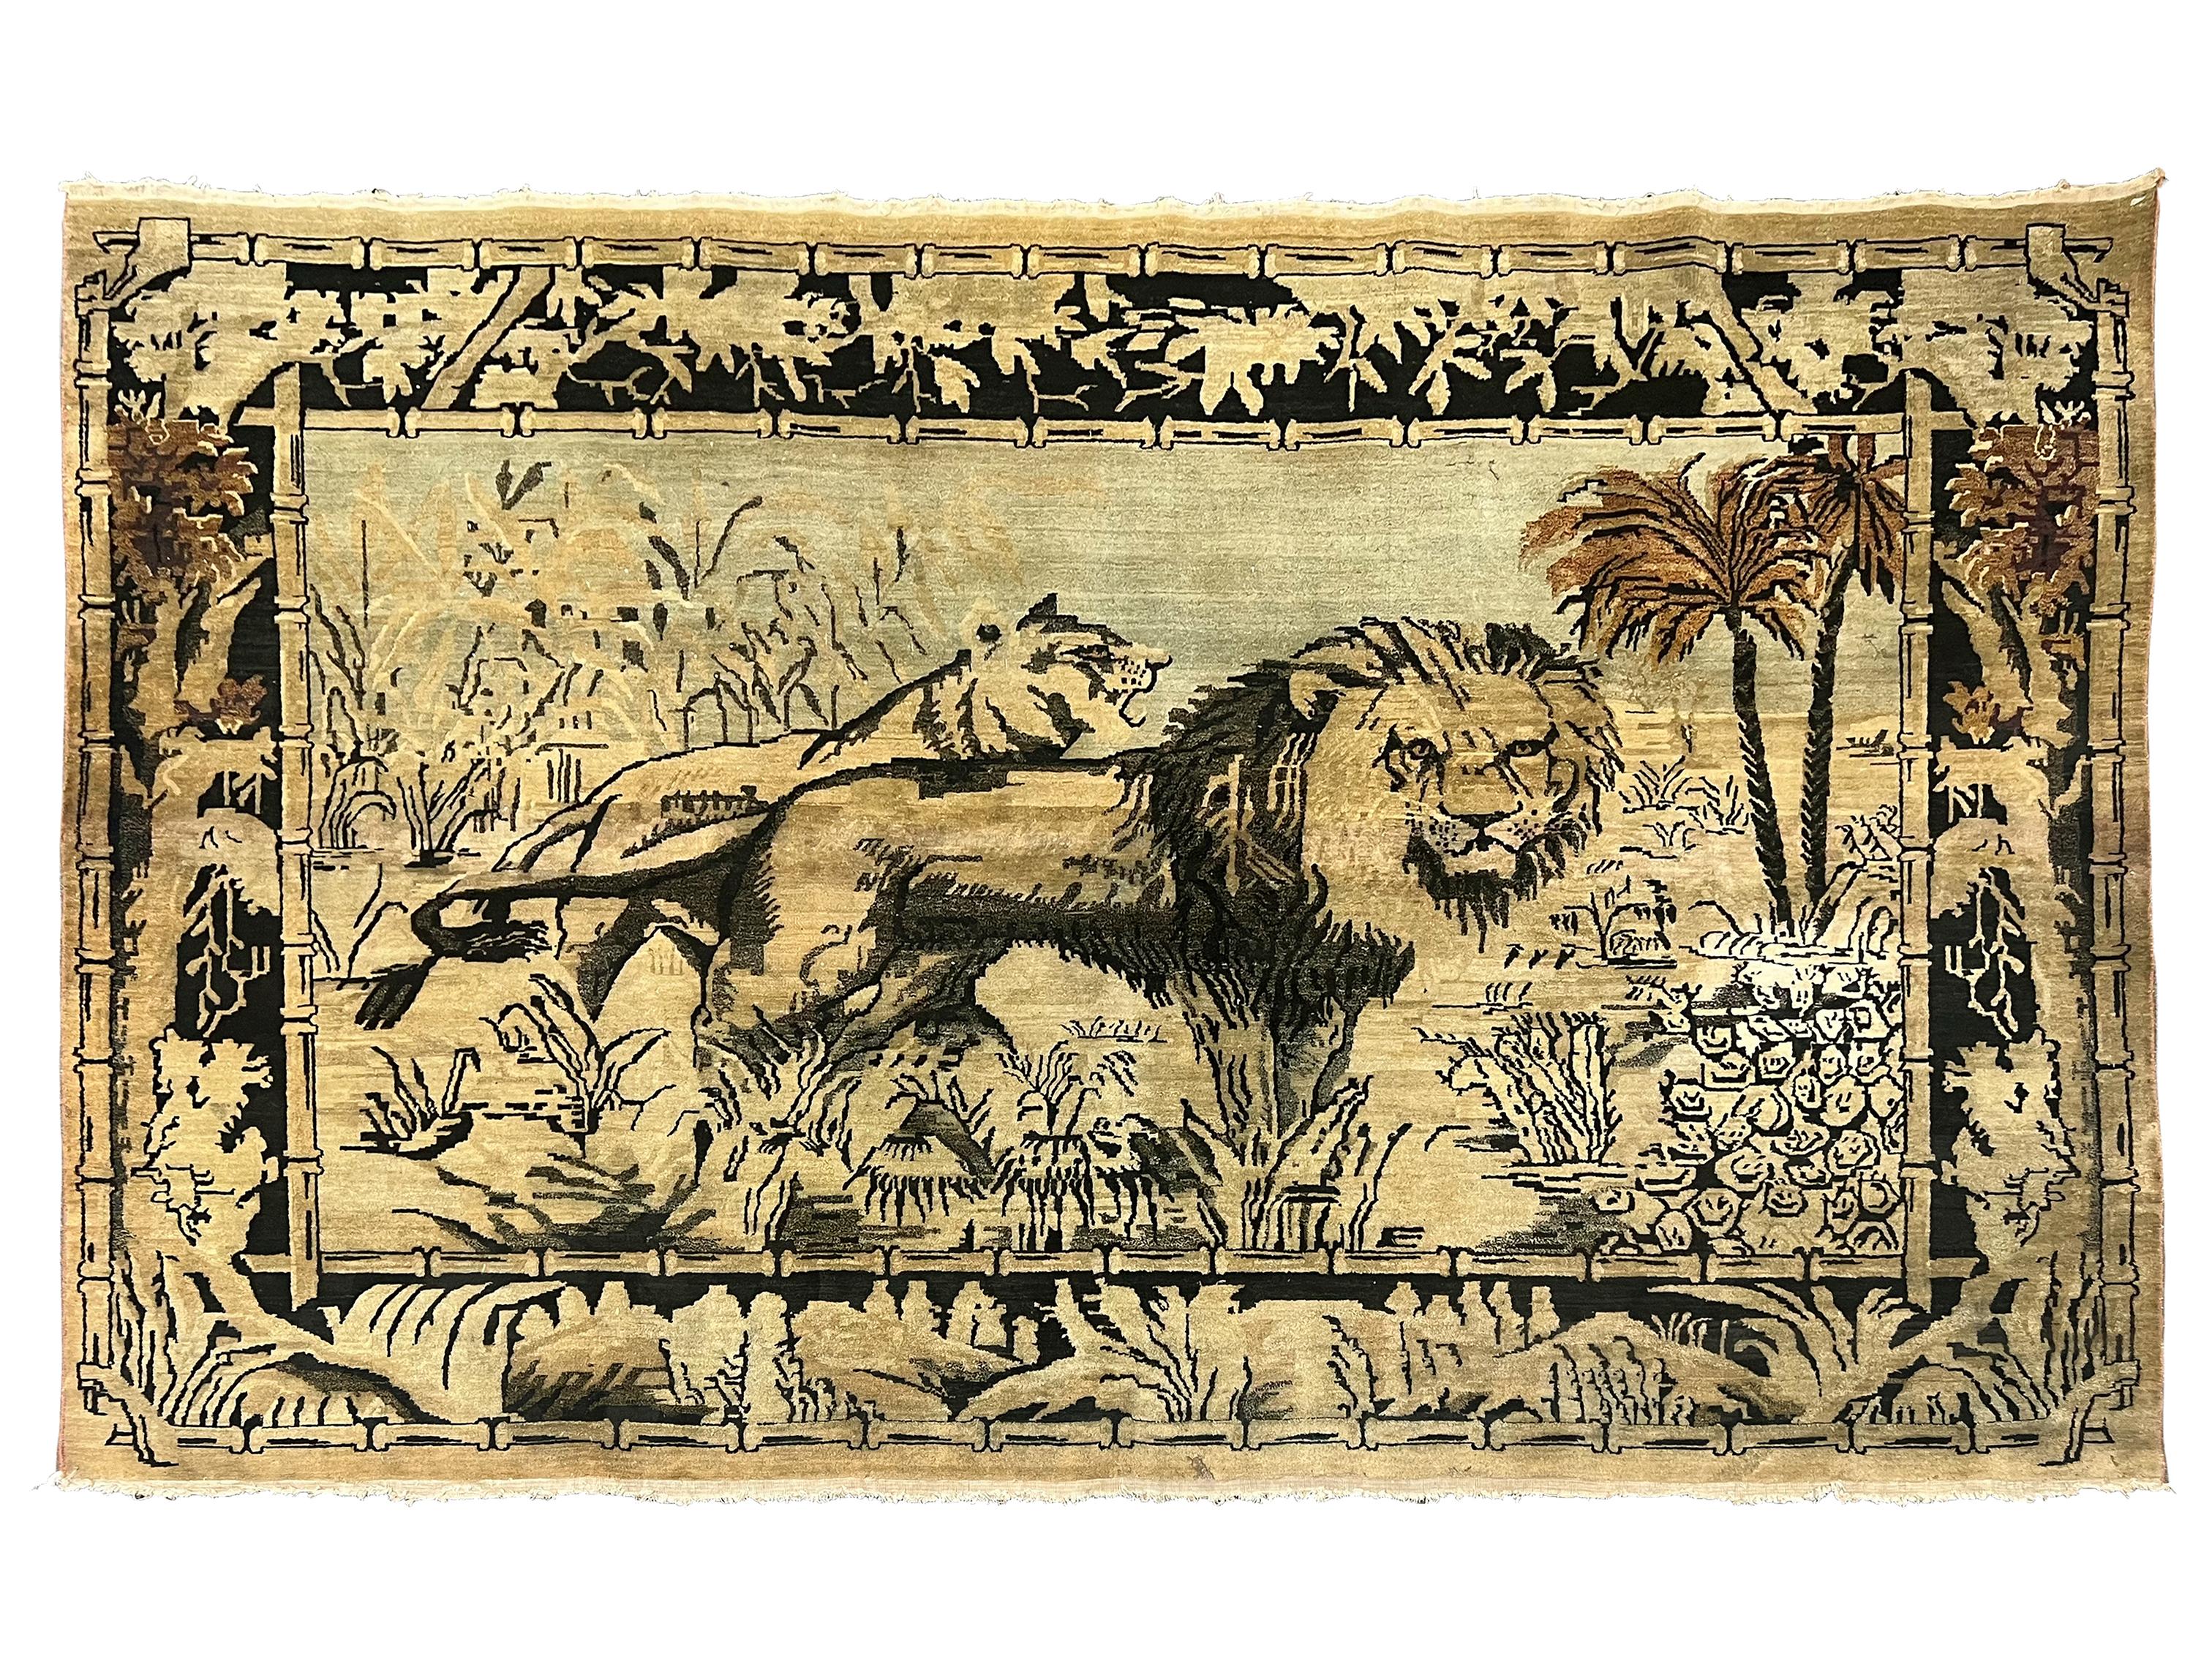 Hand-knotted wool pile on a cotton foundation - 400 KPSI

Pictorial Lion and Lioness Landscape

Circa 1900

Dimensions: 4'1